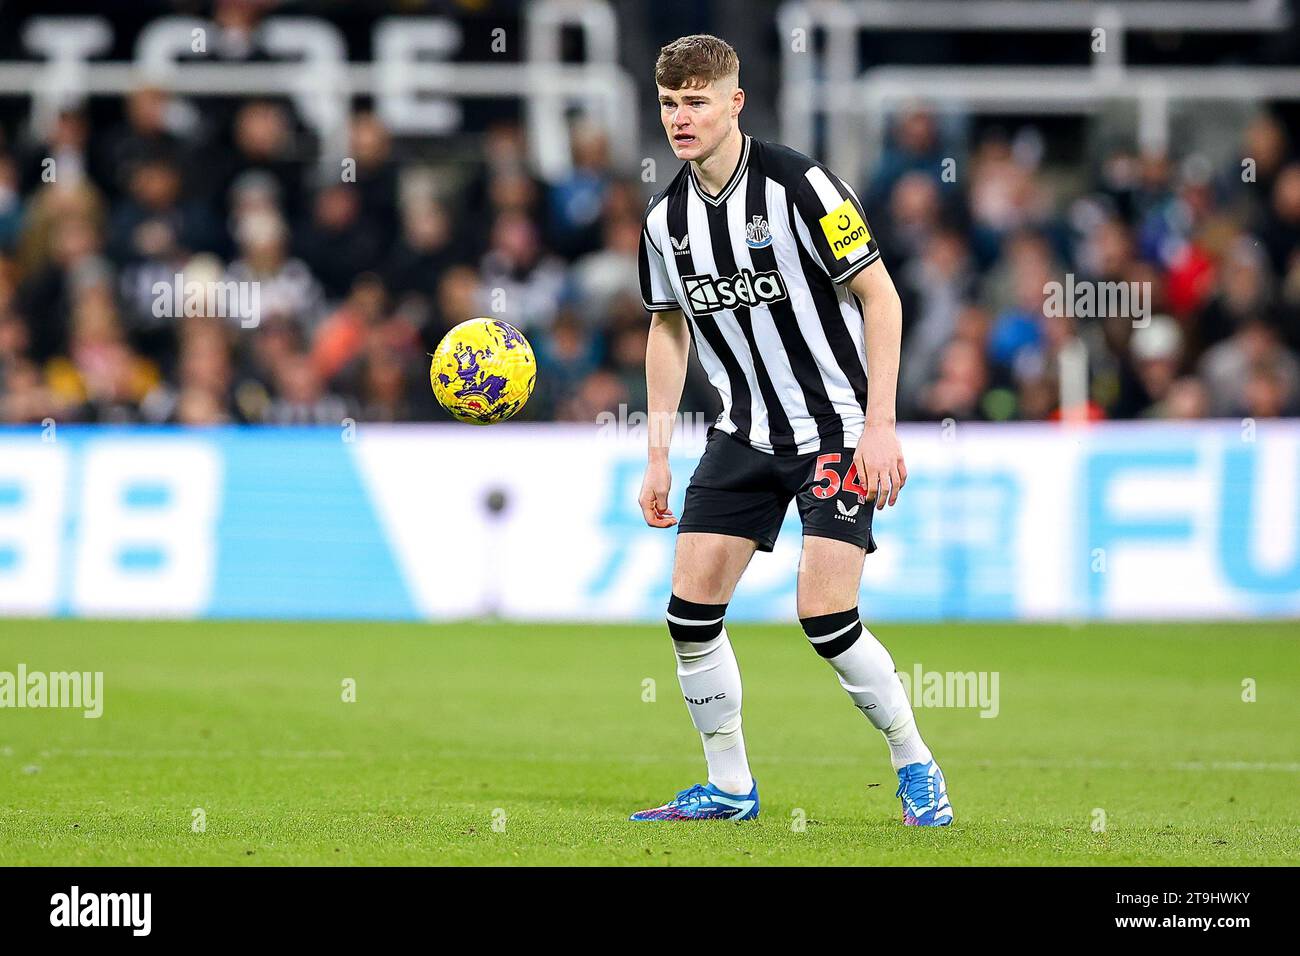 Newcastle, UK. 25th Nov, 2023. Alex Murphy #54 of Newcastle United during the Premier League match Newcastle United vs Chelsea at St. James's Park, Newcastle, United Kingdom, 25th November 2023 (Photo by Ryan Crockett/News Images) Credit: News Images LTD/Alamy Live News Stock Photo